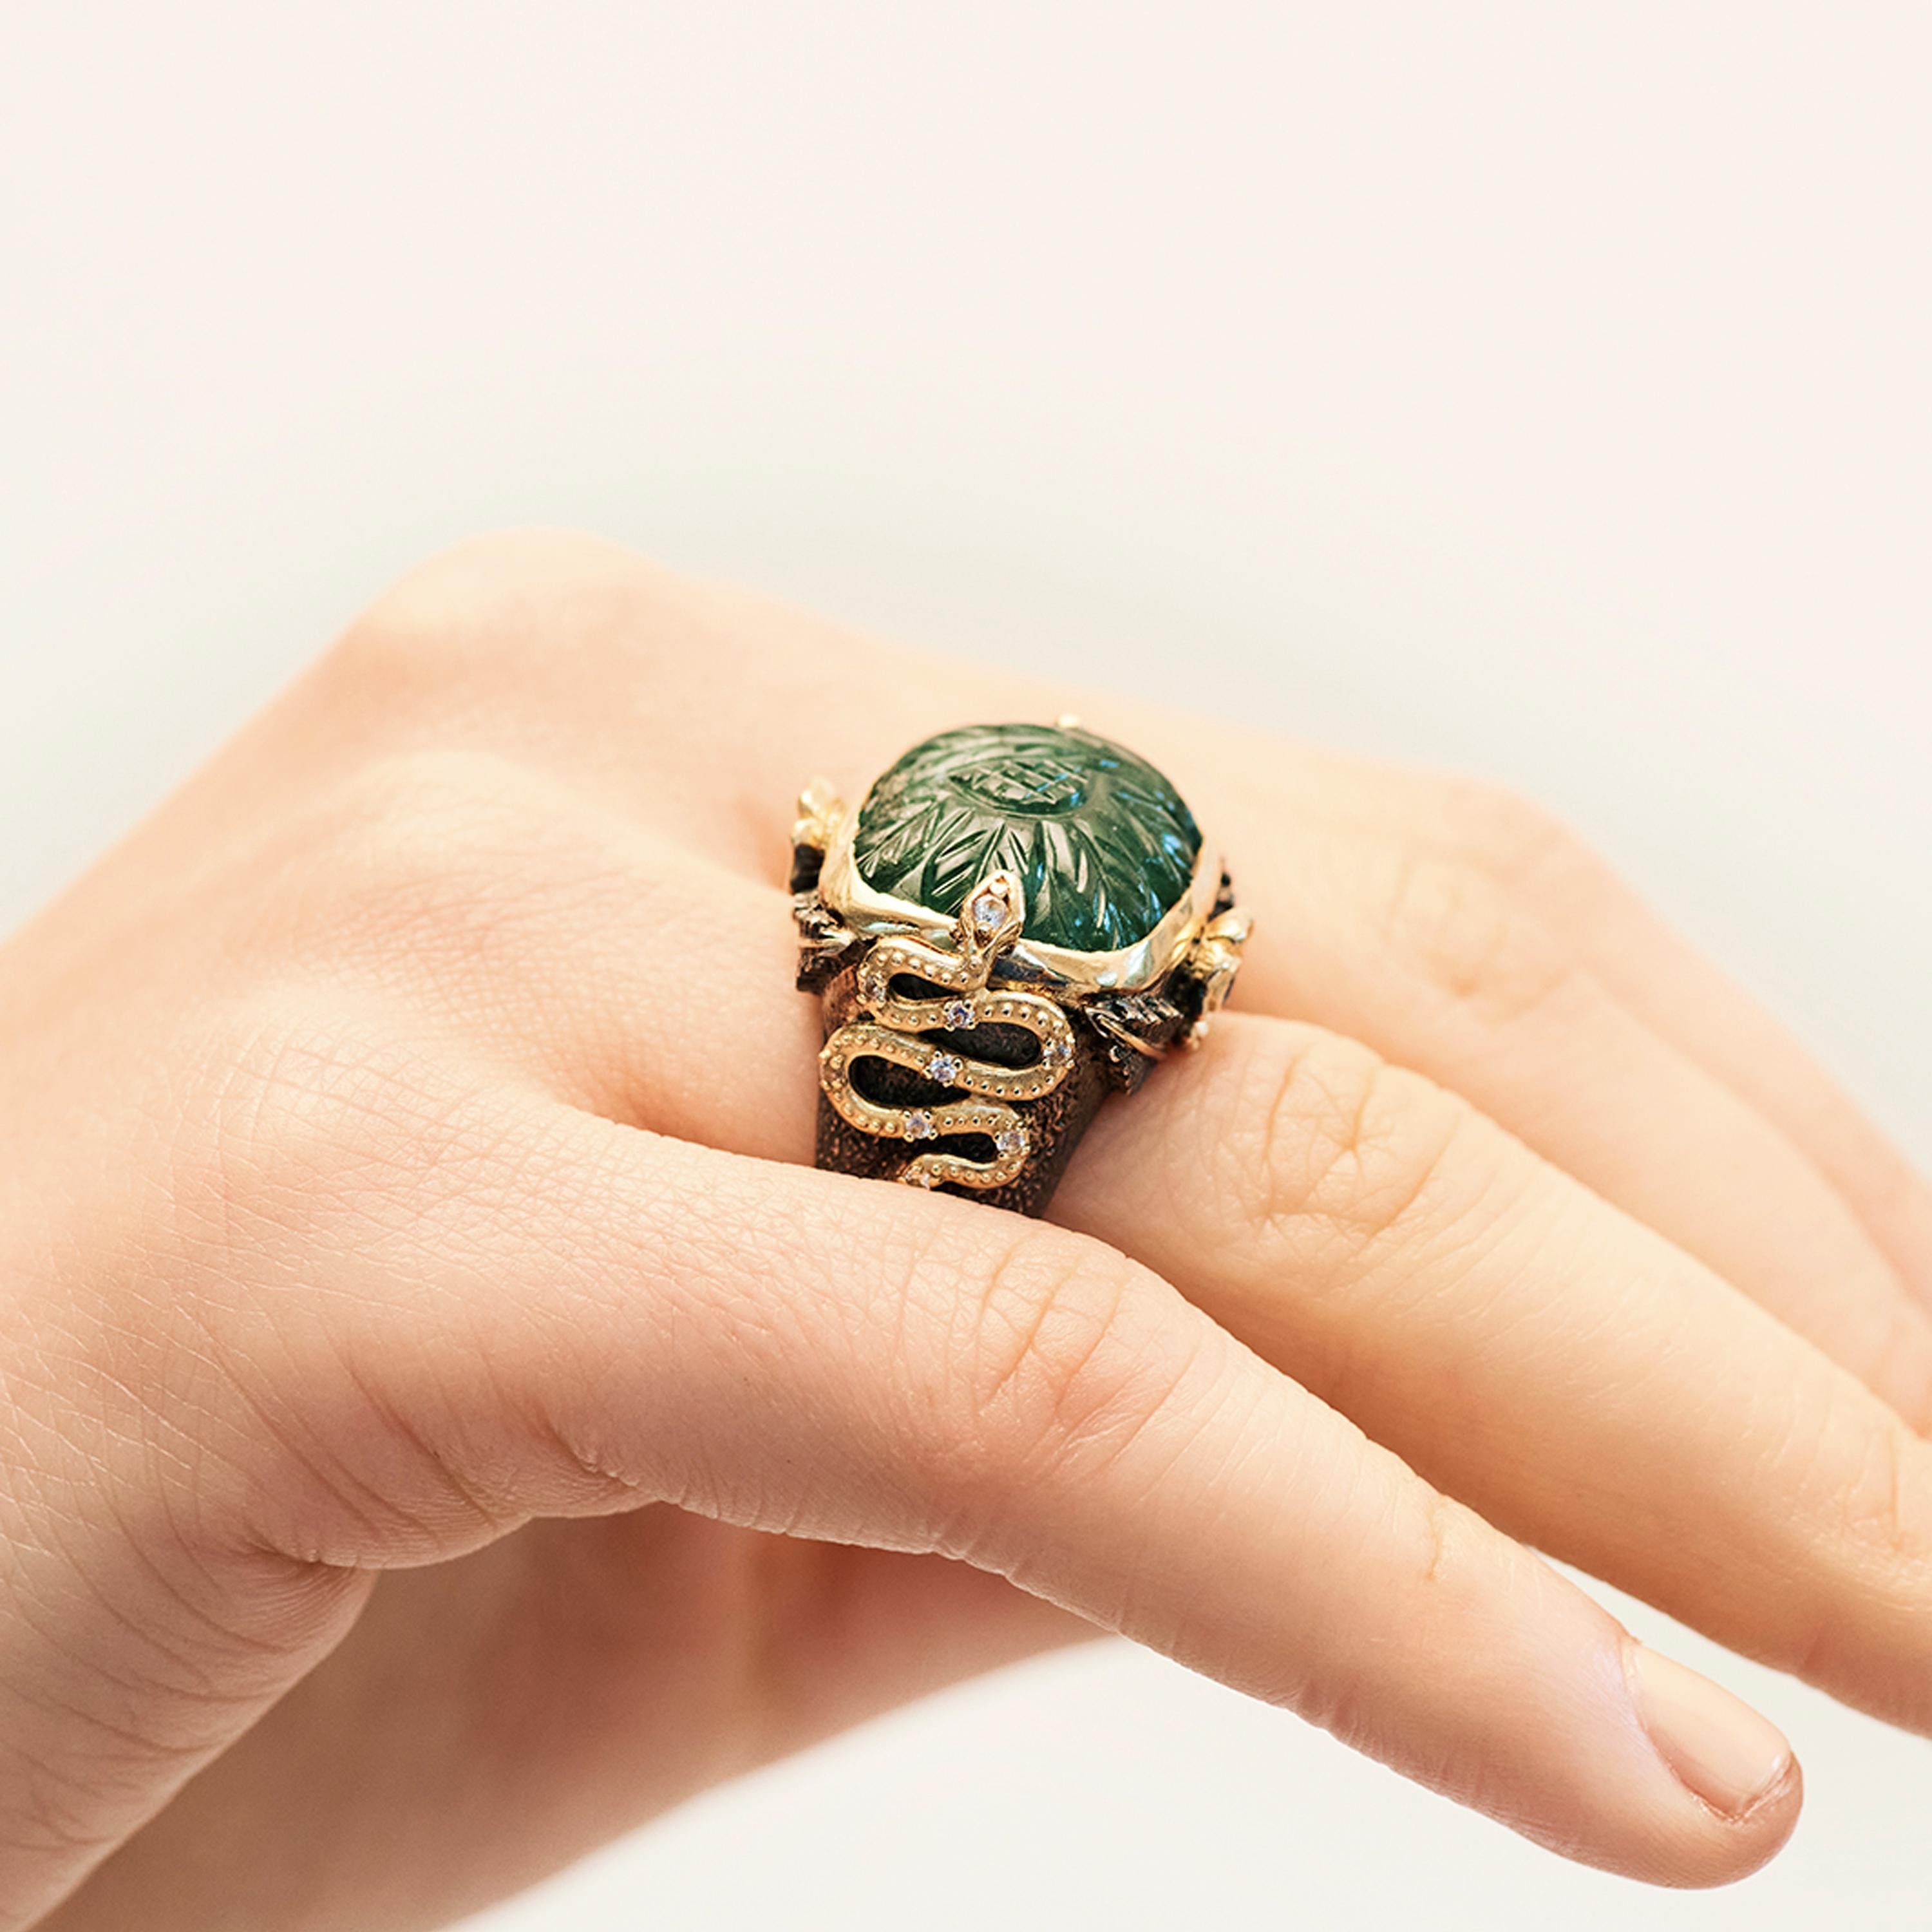 Invited into Stella’s world through a striking carved green emerald (26.27cts) carved with leaves, the Firenze Too ring is rich with colour, texture and narrative. Serpents surround the central stone, with white sapphires (0.43cts) set in their